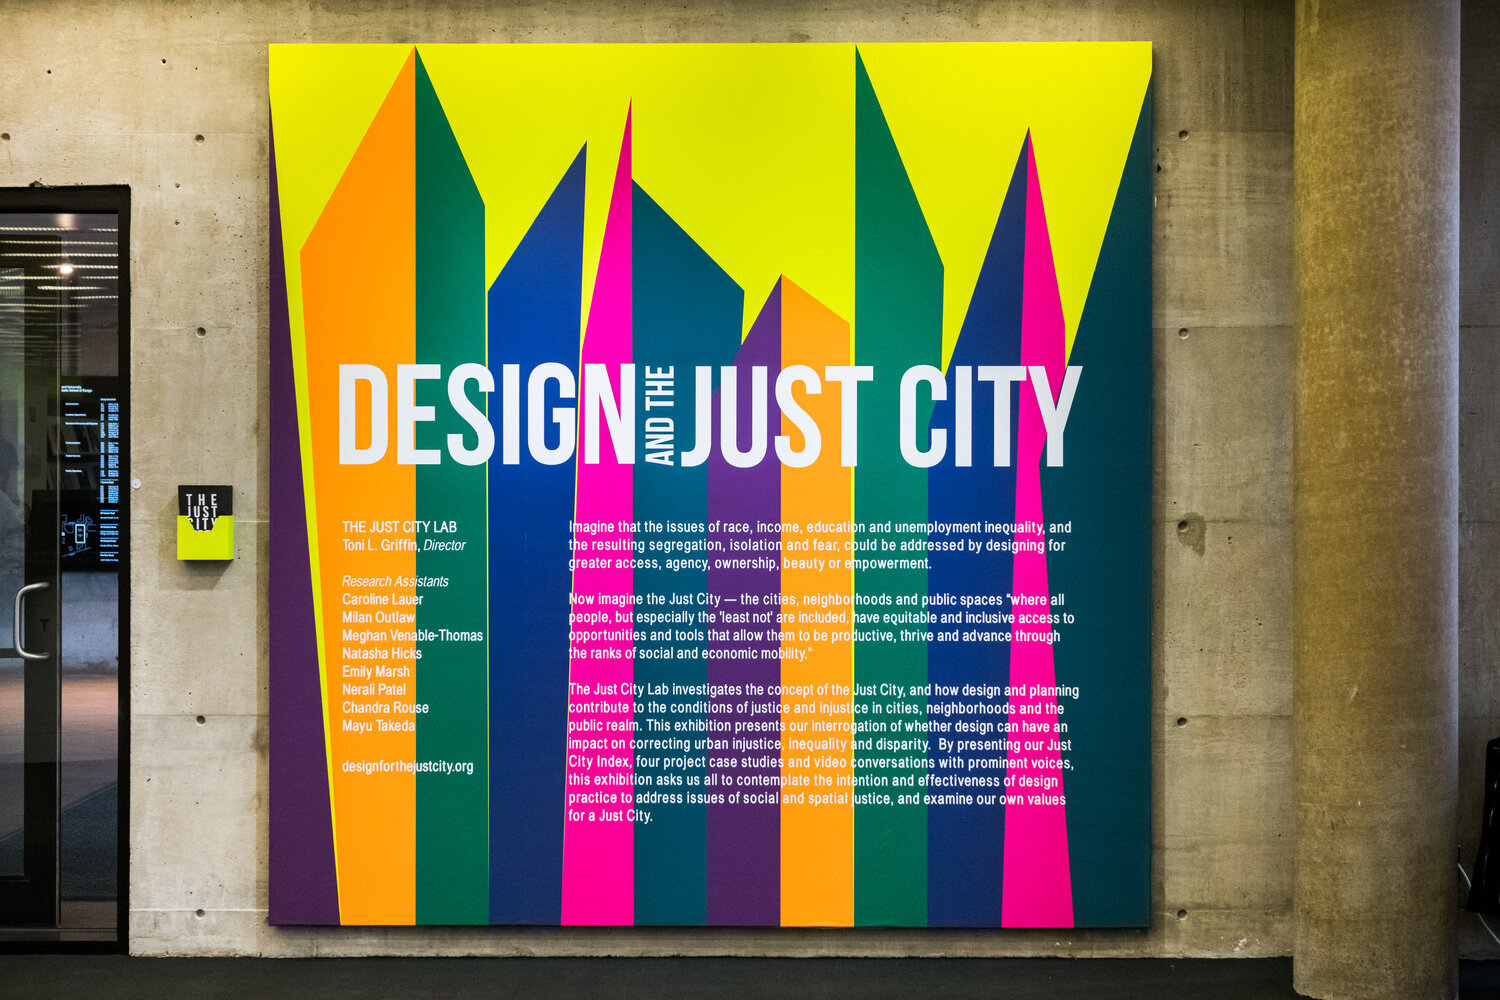 03292018_Design_And_The_Just_City_Exhibit_029.jpg